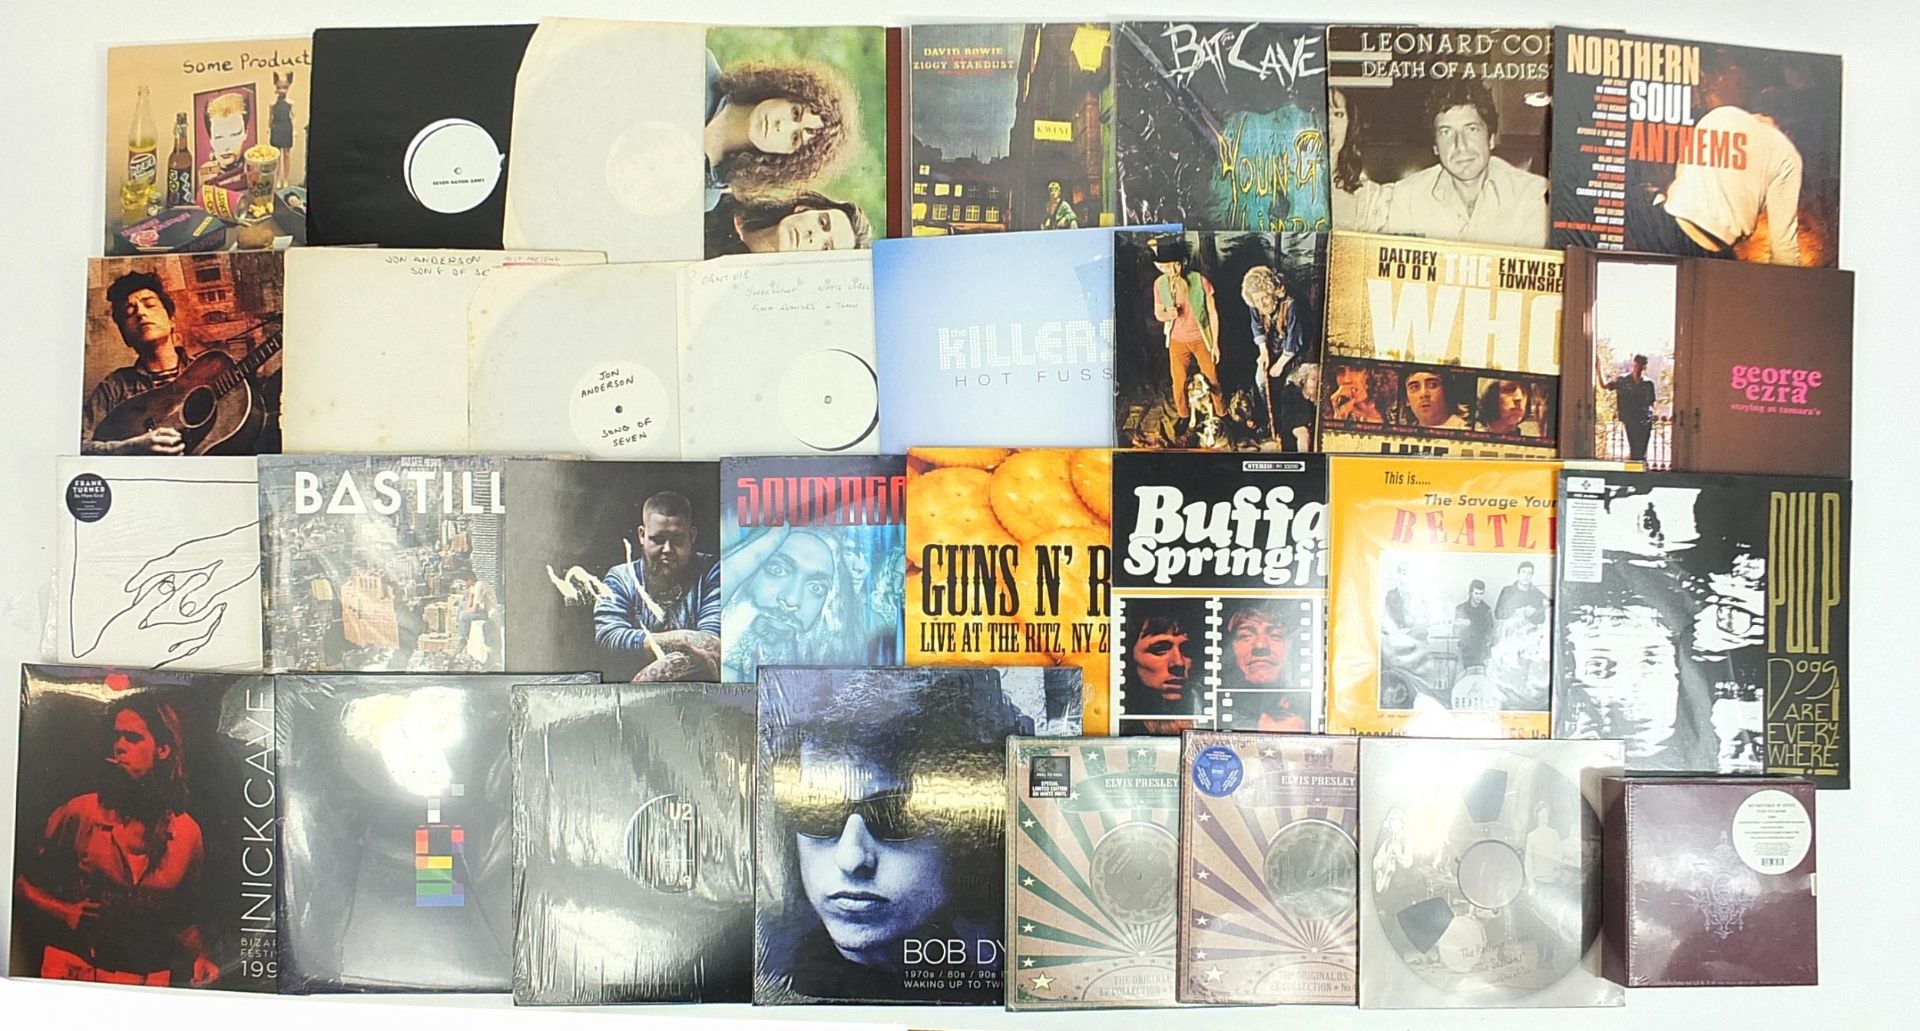 Collection of rare vinyl LP's, mostly rock and prog including Led Zeppelin I on Plum Atlantic label, - Image 9 of 11